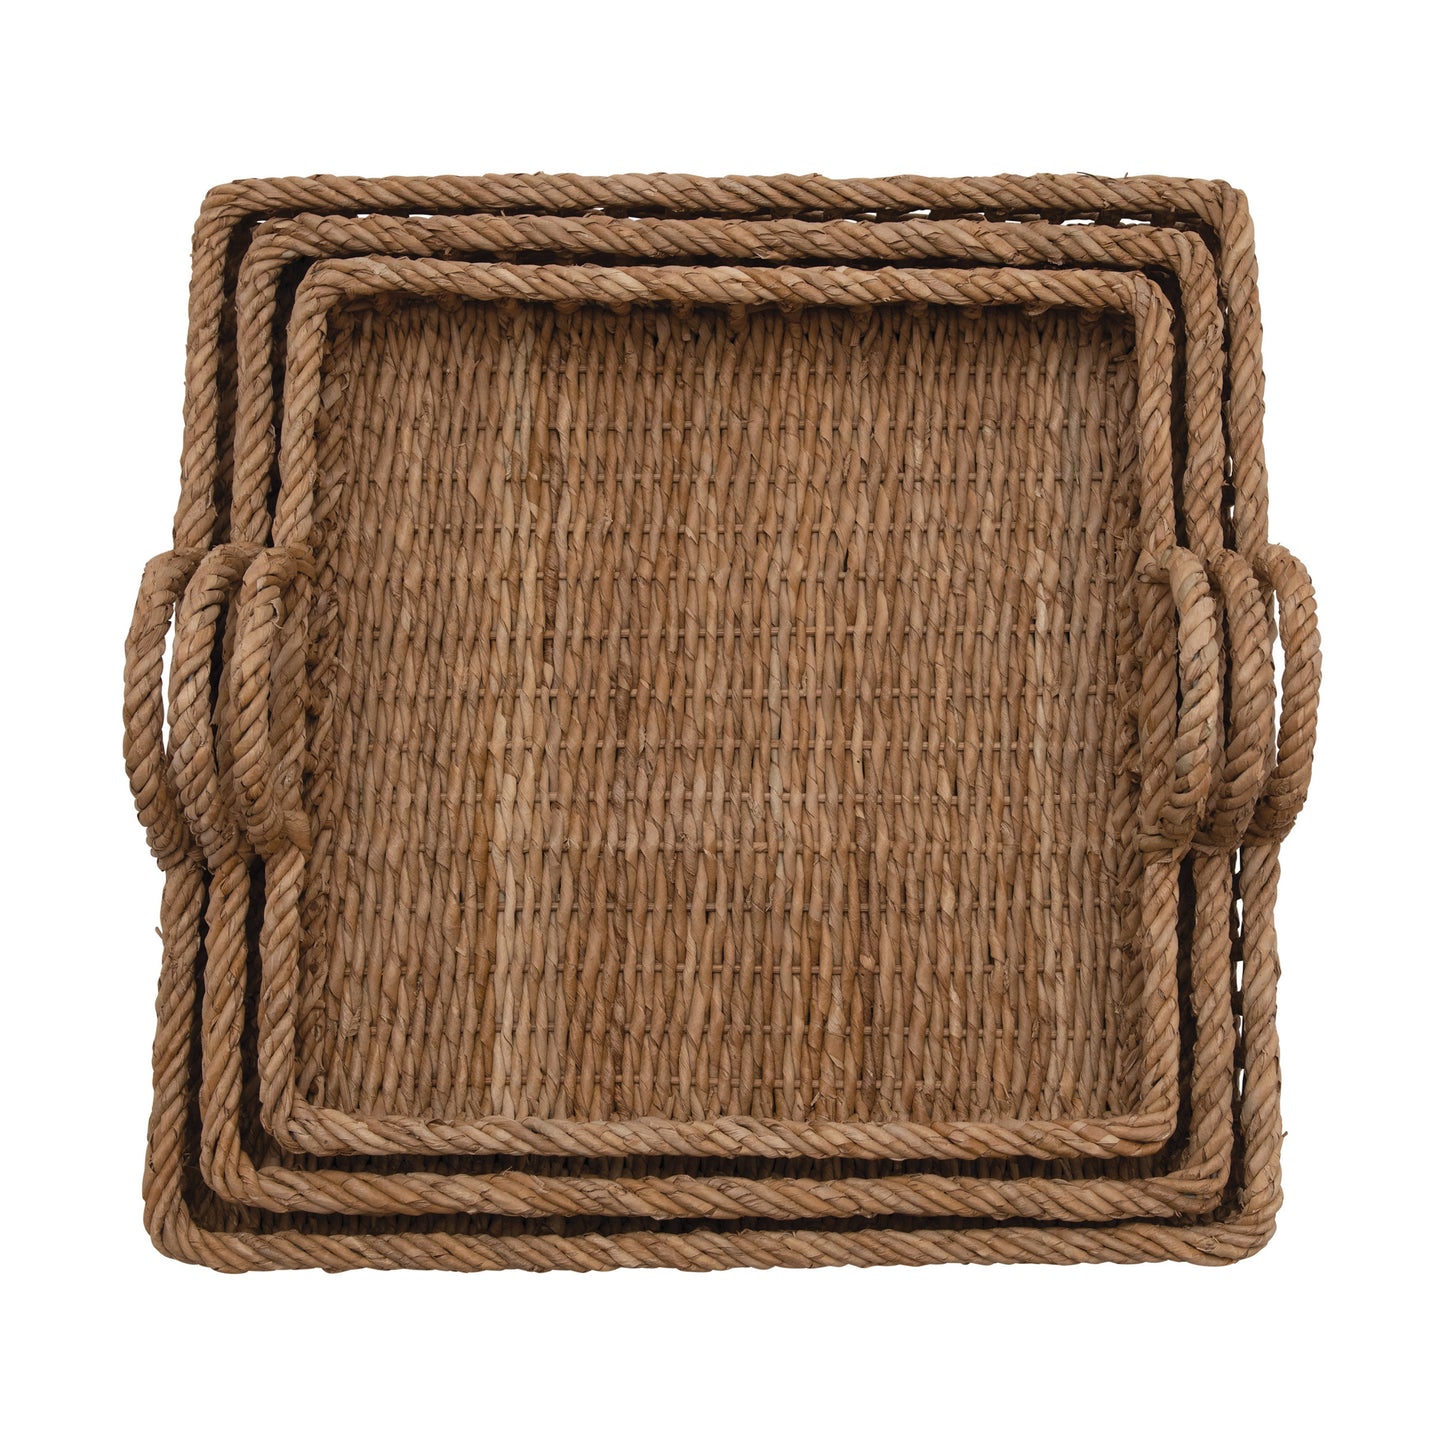 Decorative Hand-Woven Trays with Handles